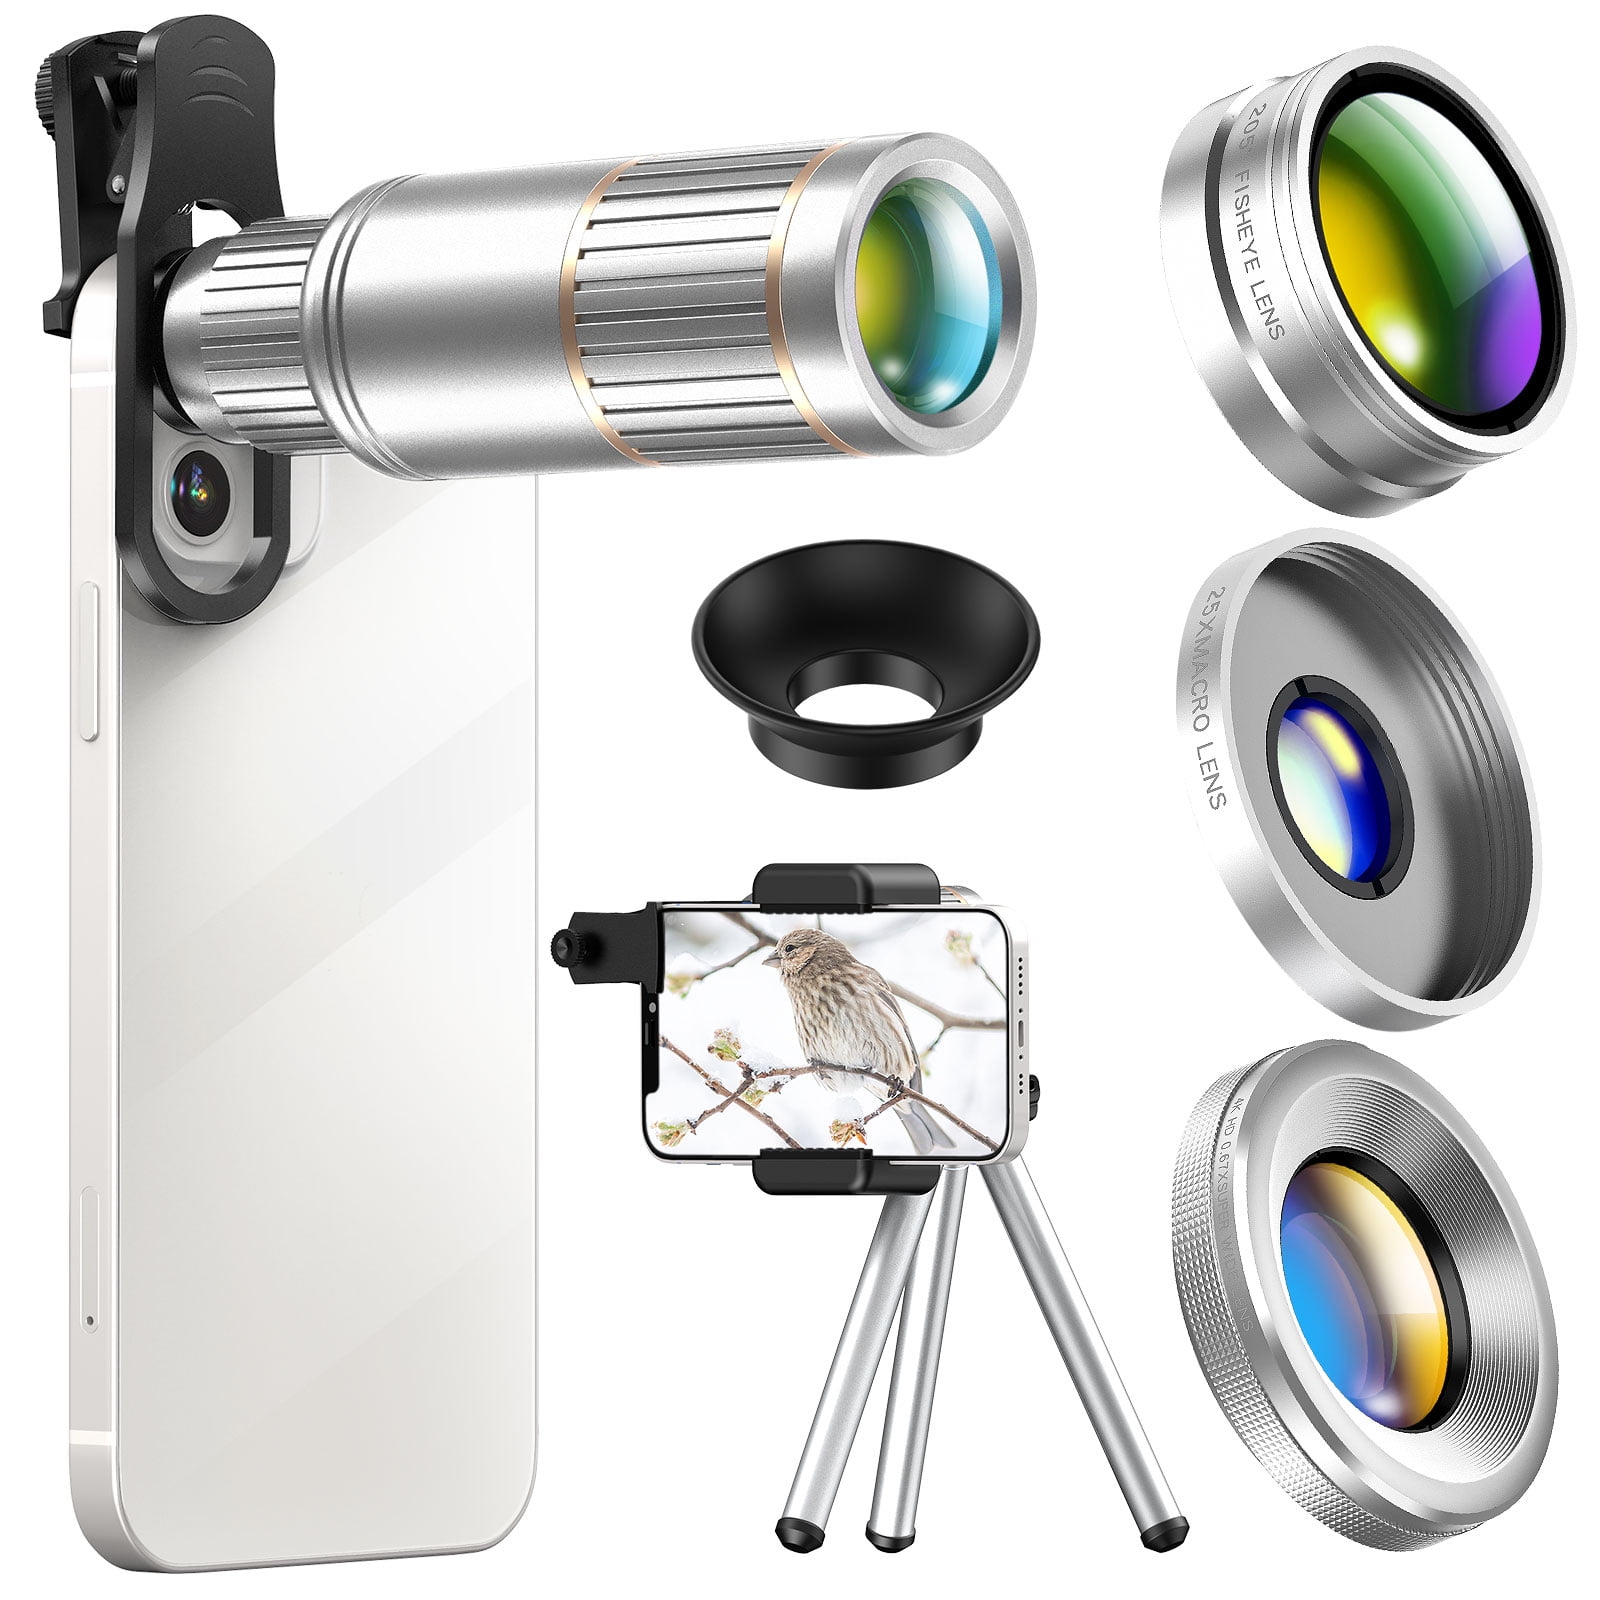 More Beautiful Pictures With the iPhone lens 0.45X 140° Wide Angle Lens 12.5X Macro Lens Hvspring smartphone Optical glass Camera lens kit for iPhone 8/7/6 Plus Samsung and Most of Smartphone 2in1